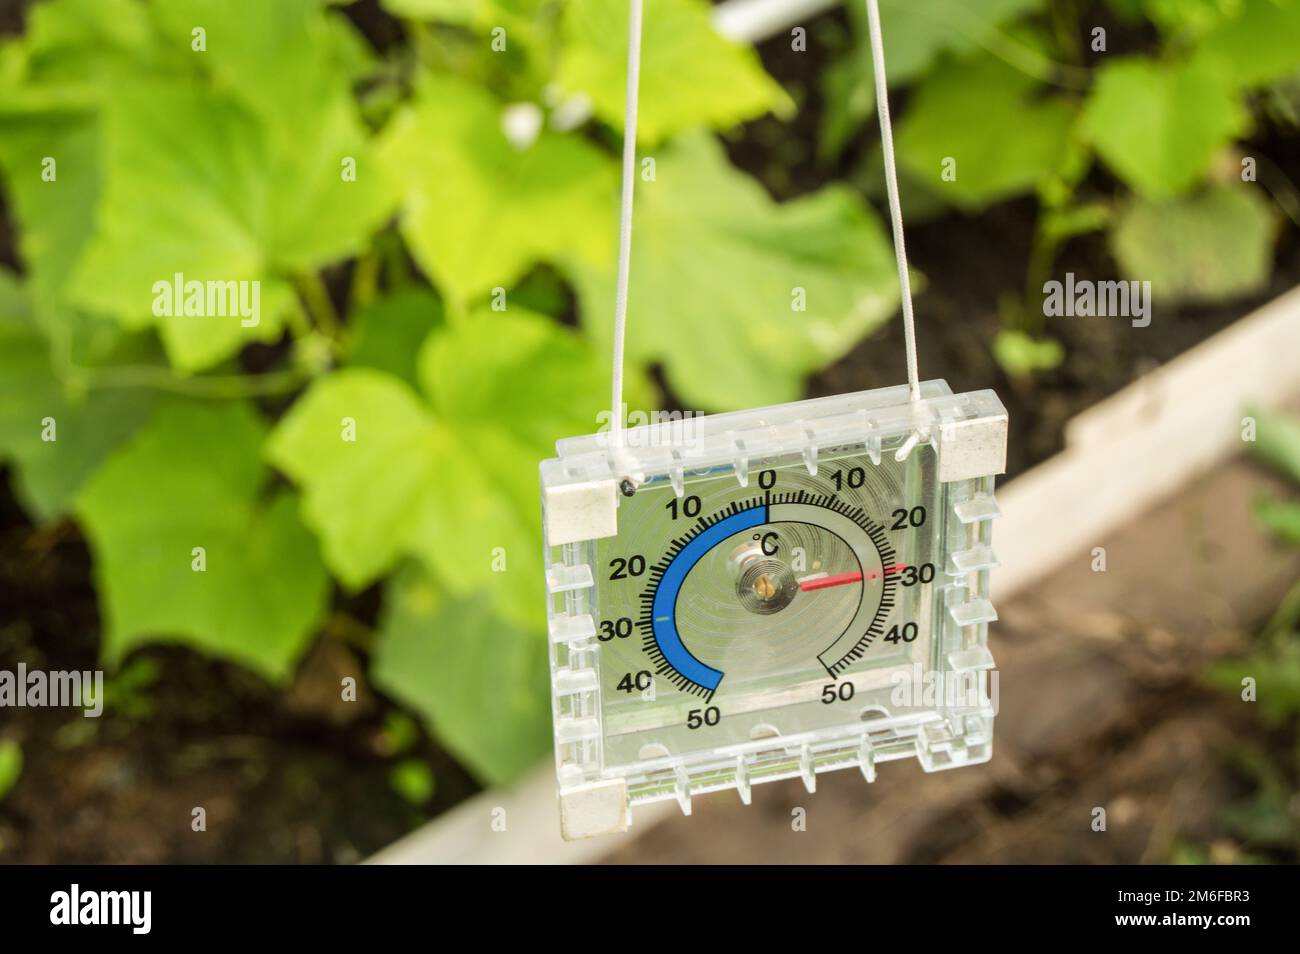 https://c8.alamy.com/comp/2M6FBR3/thermometer-for-measuring-air-temperature-in-the-greenhouse-2M6FBR3.jpg